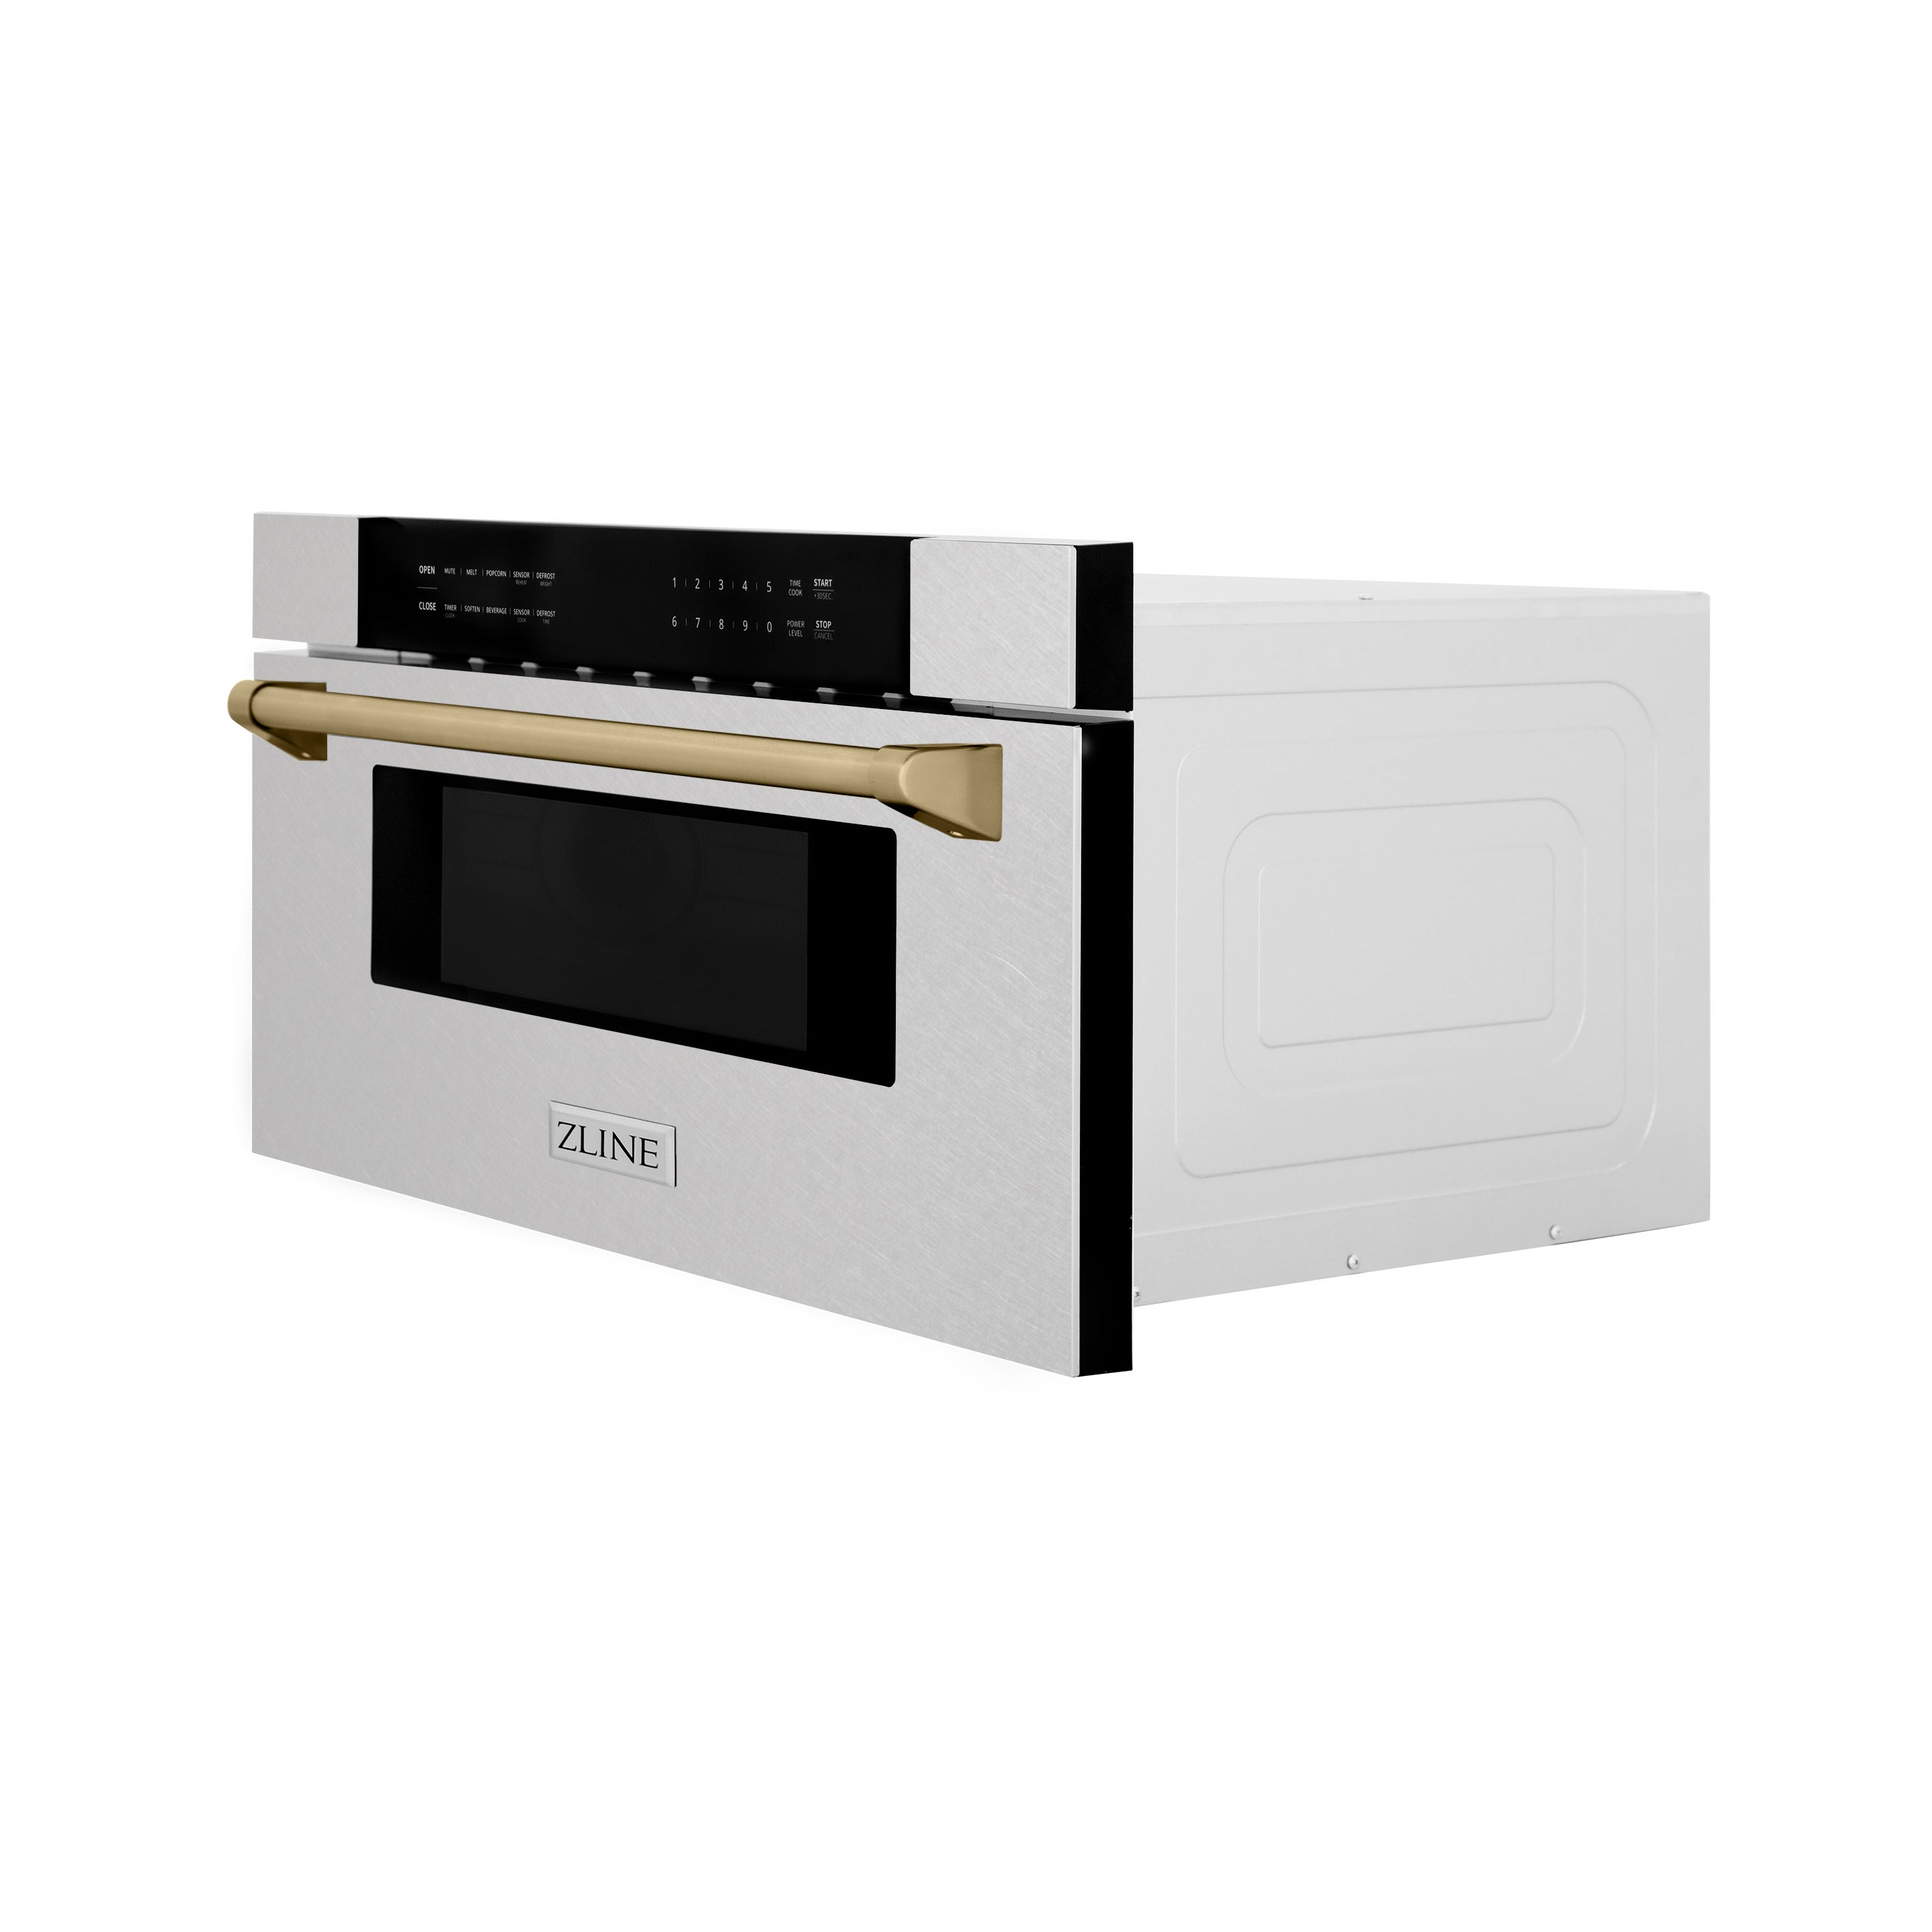 ZLINE Autograph Edition 30 in. 1.2 cu. ft. Built-In Microwave Drawer in Fingerprint Resistant Stainless Steel with Champagne Bronze Accents (MWDZ-30-SS-CB) Side View Drawer Closed